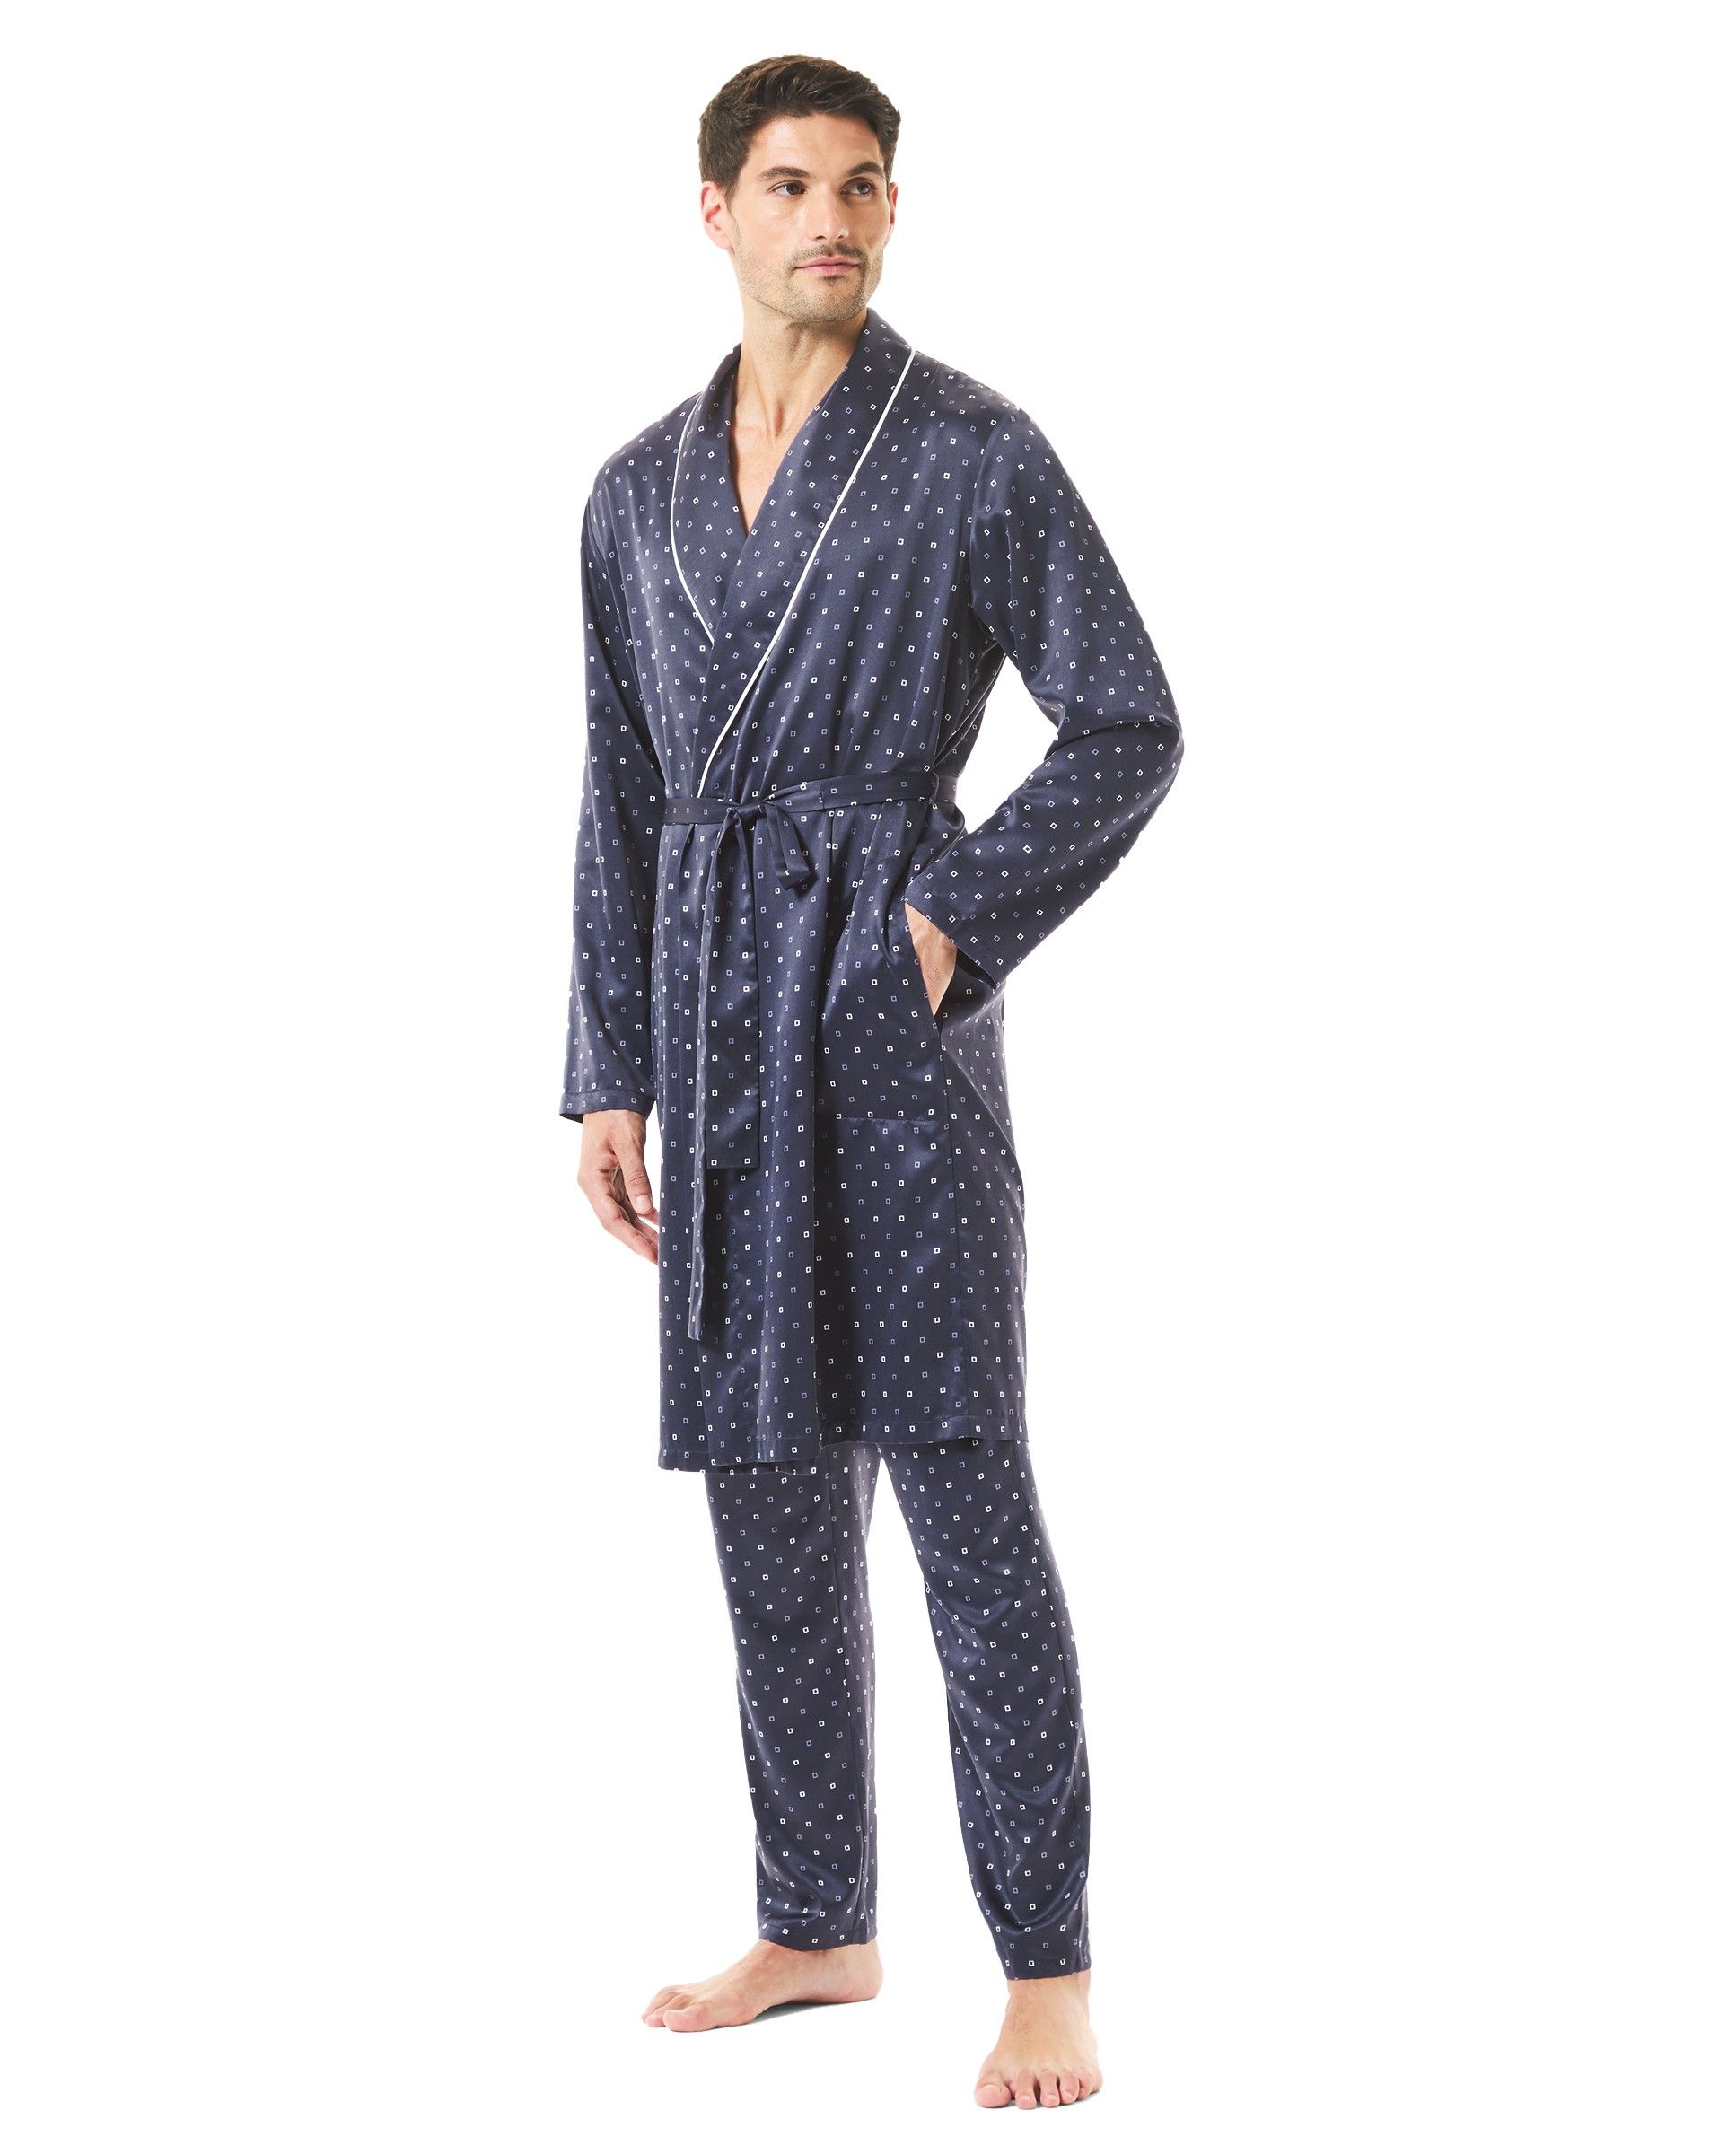 Men's short blue satin double-breasted coat with Christmas polka dot pattern, pockets and contrasting piping detail.